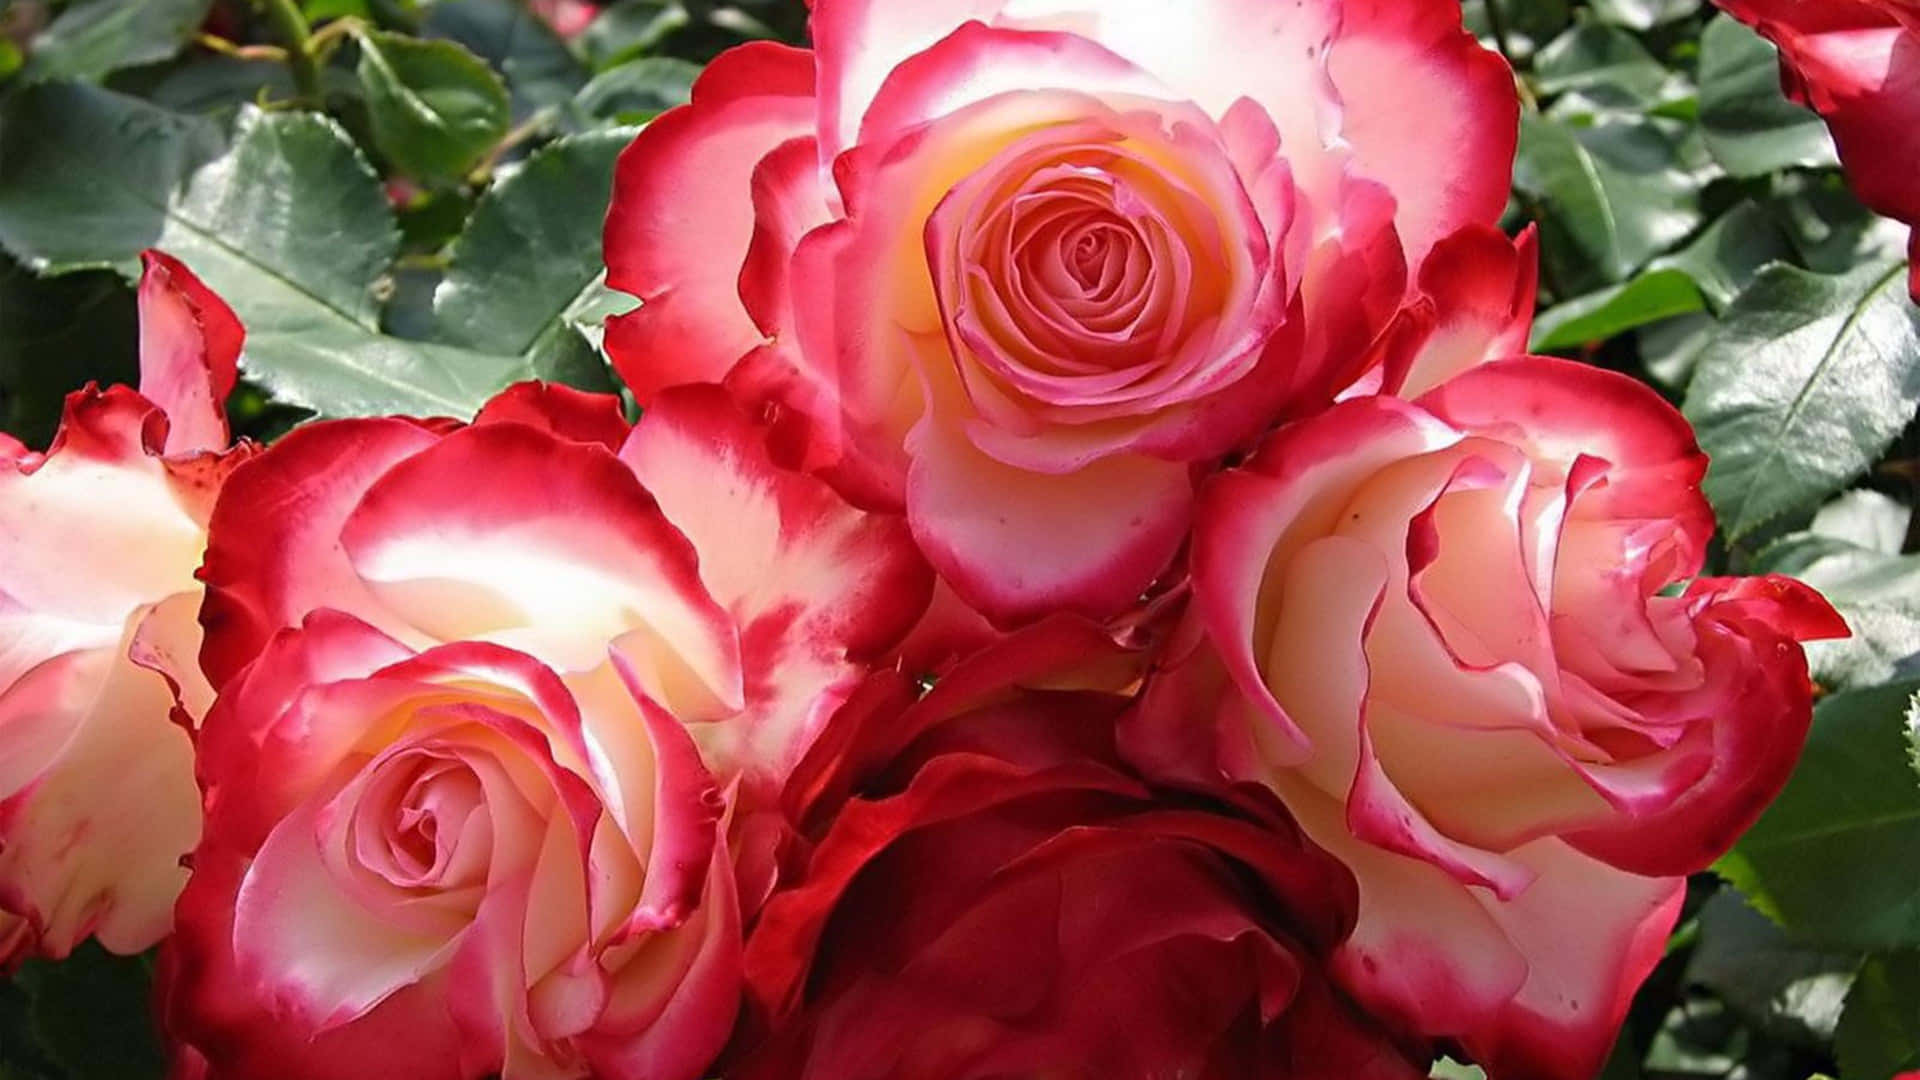 Beauty Of Red And White Roses Wallpaper